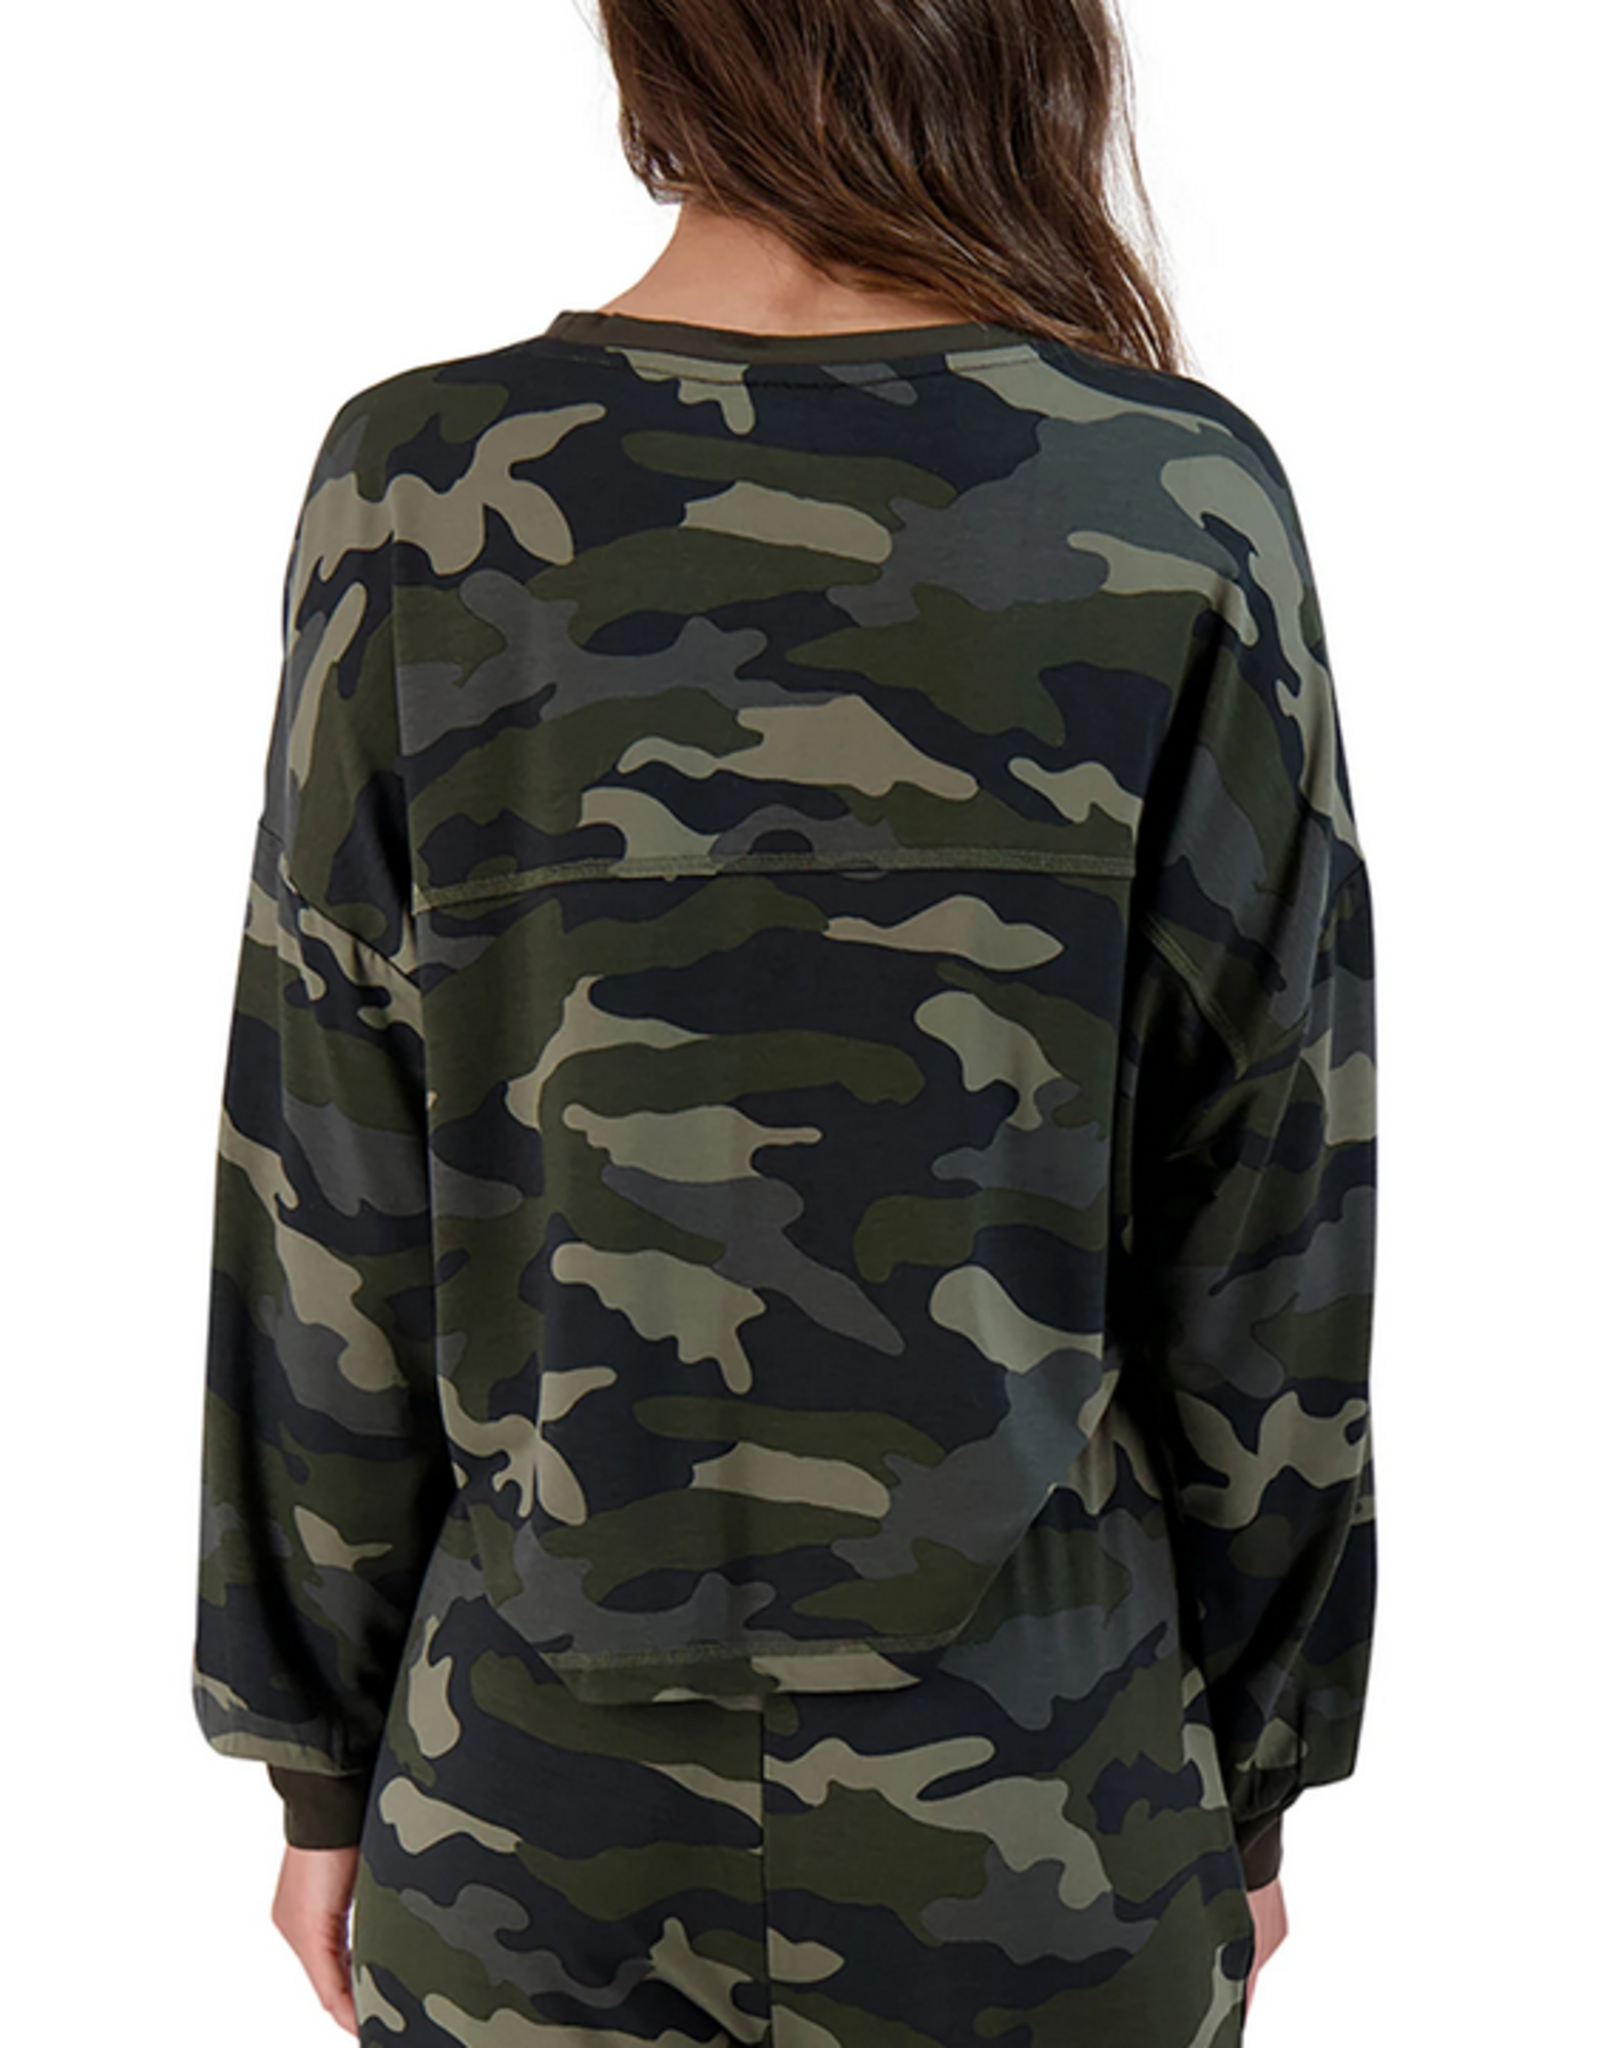 BB Dakota Nothin' To See Here Top - Army Green